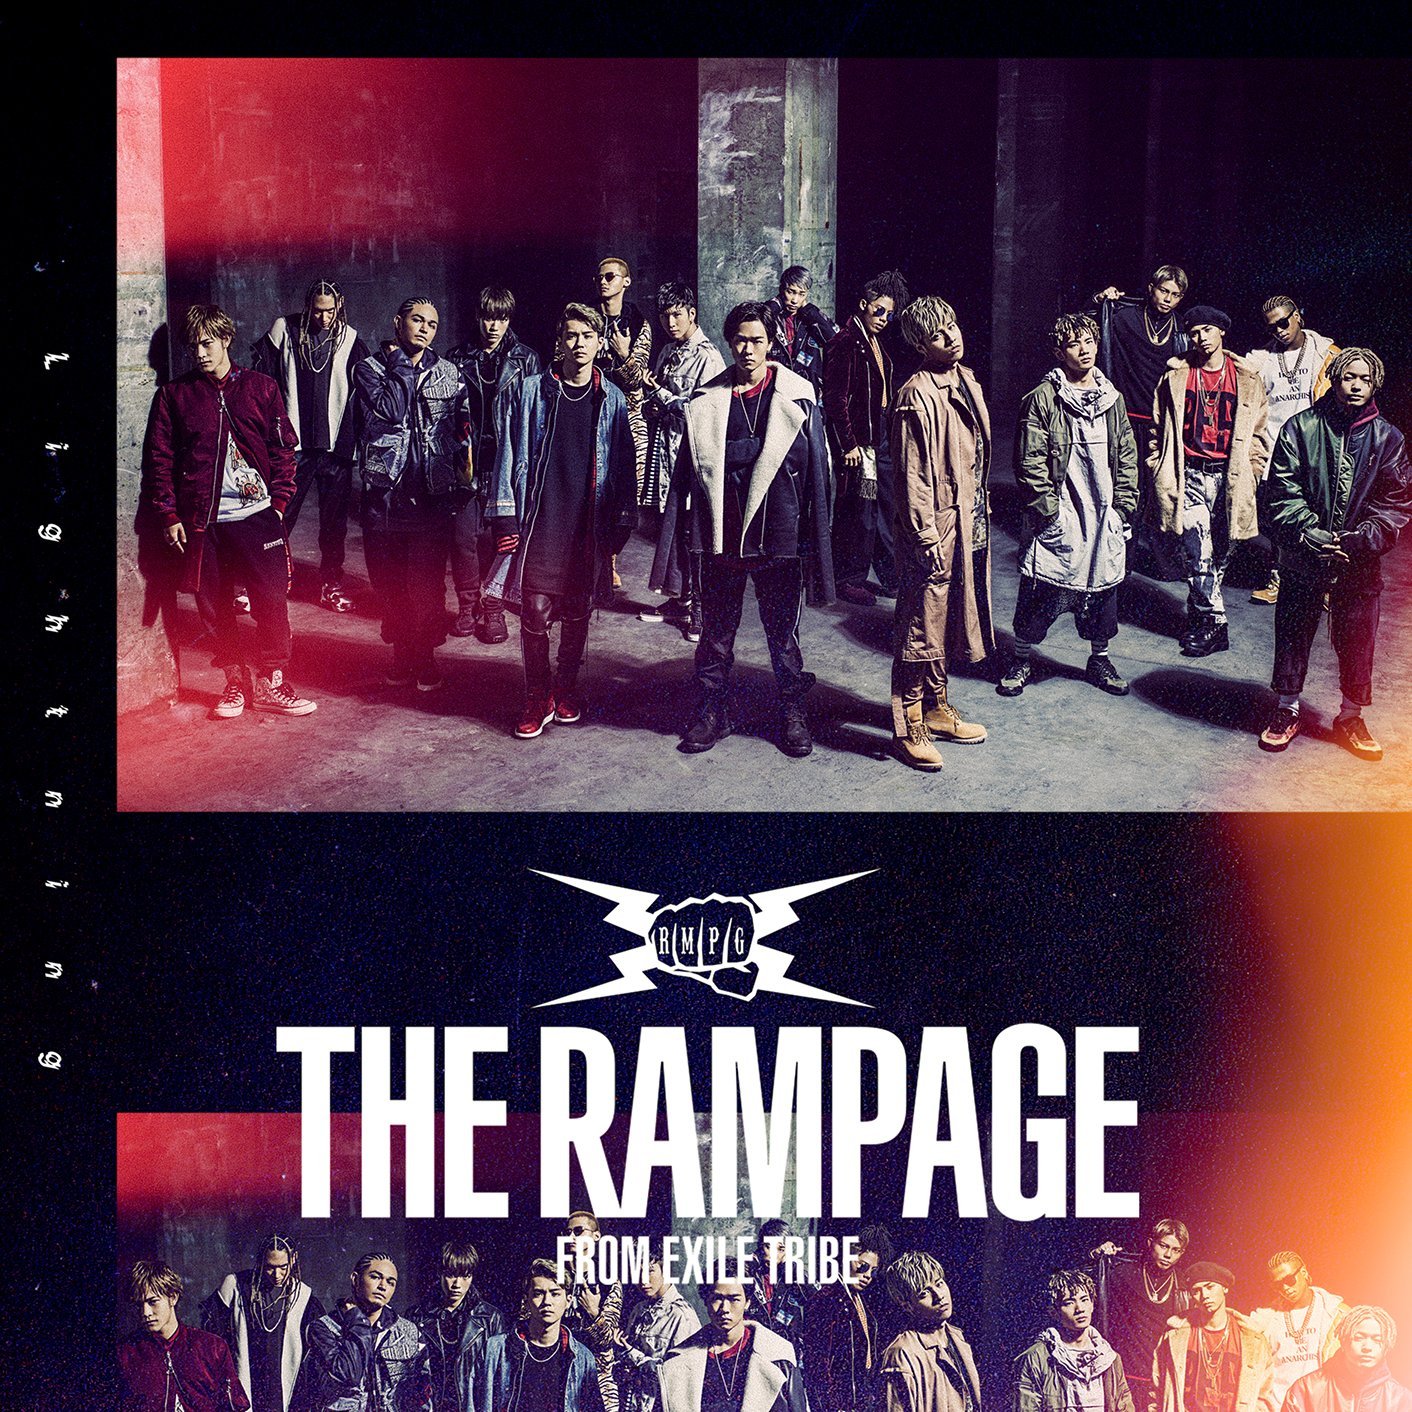 The Rampage 宮野真守 : ここでしか読めない! 大人気グループ「THE RAMPAGE」が今の想い  : Ma55ive